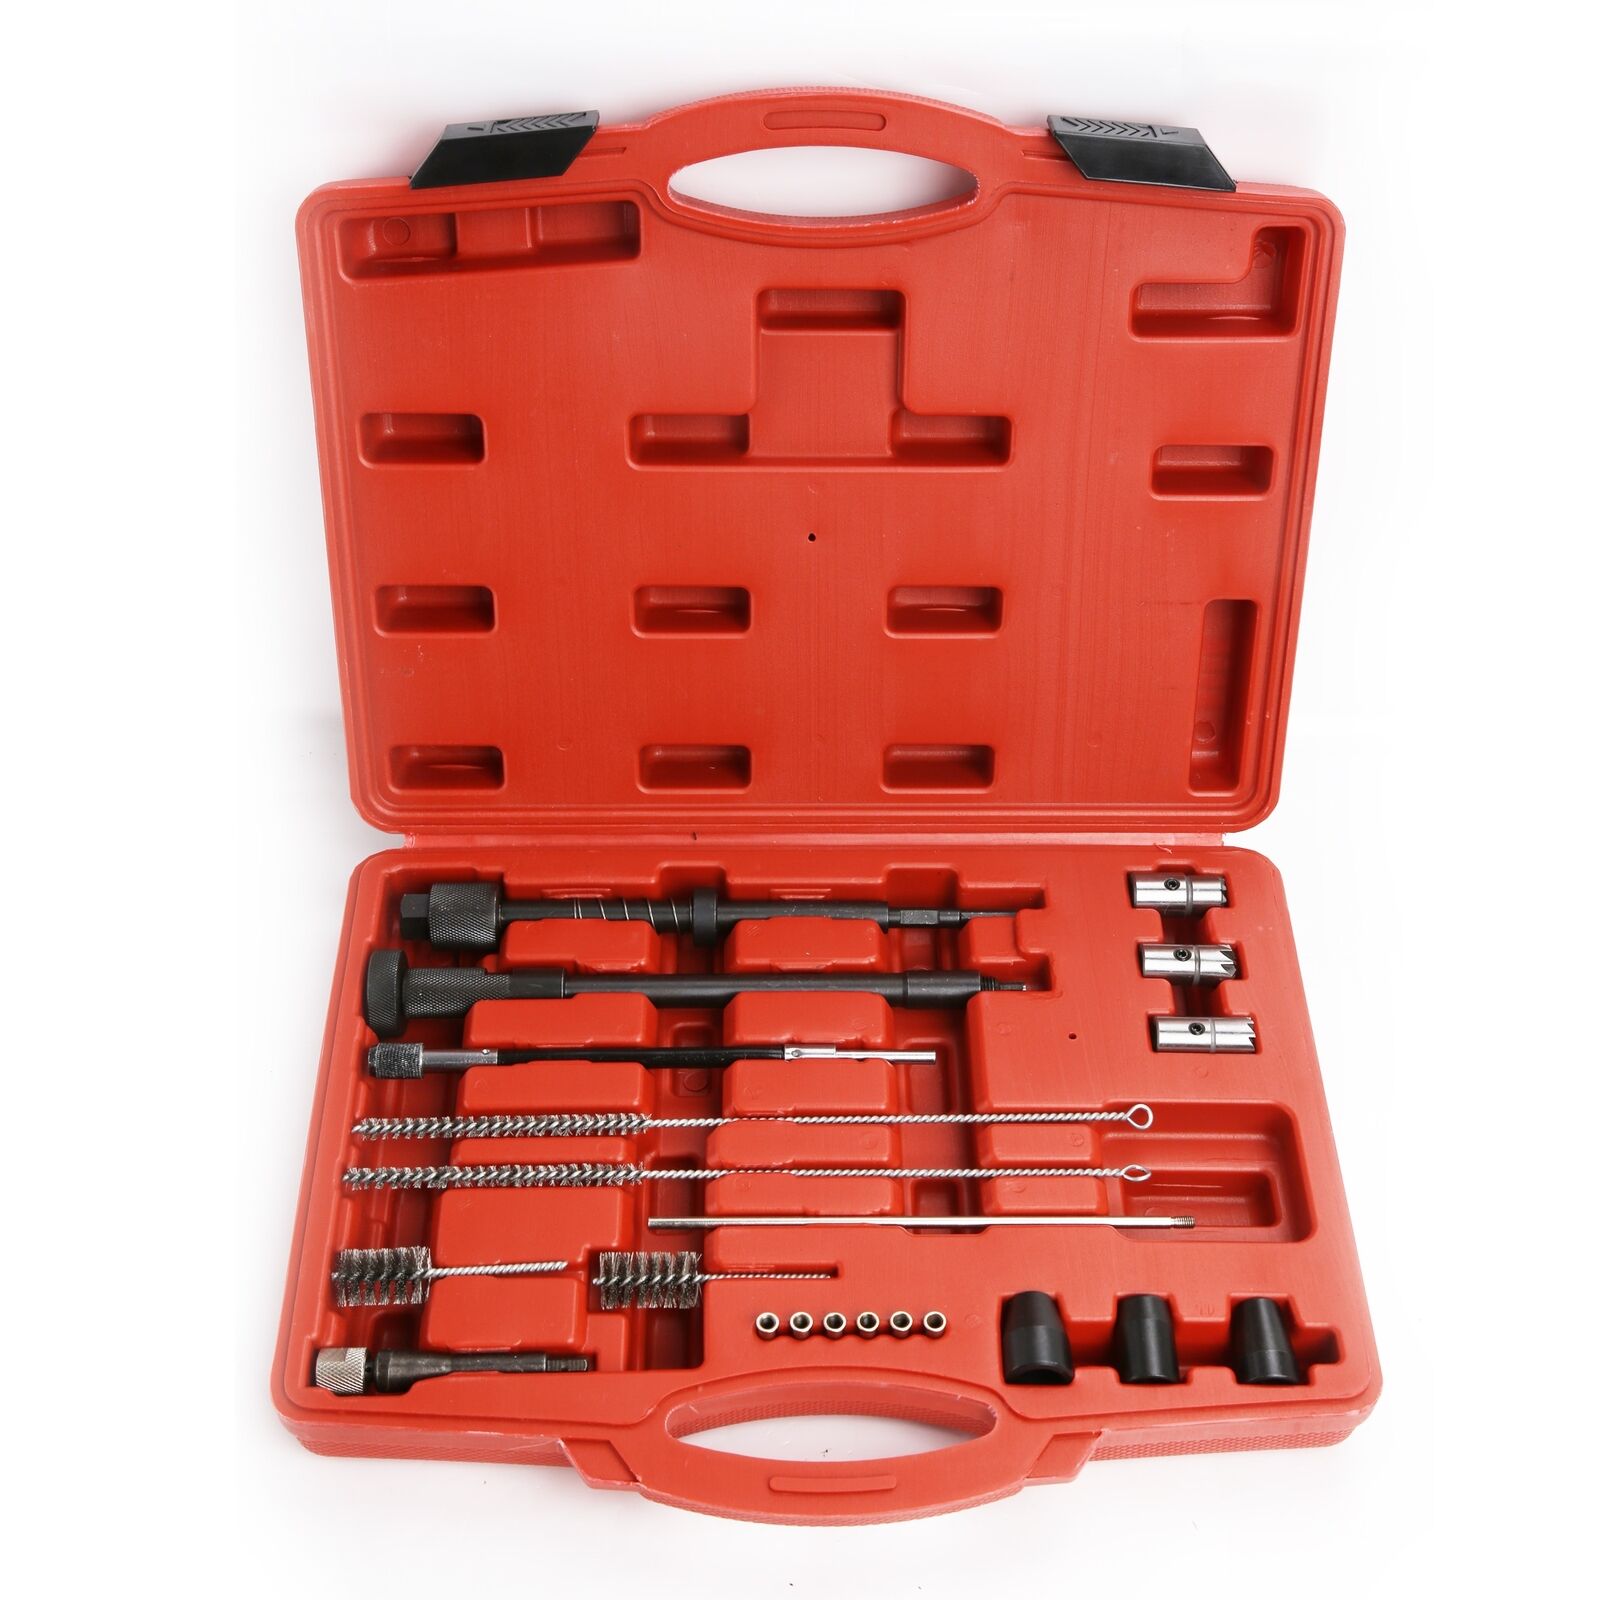 Injector Seat & Manhole Cleaning Set Cutters Guide Seal Puller Brushes Cleaner